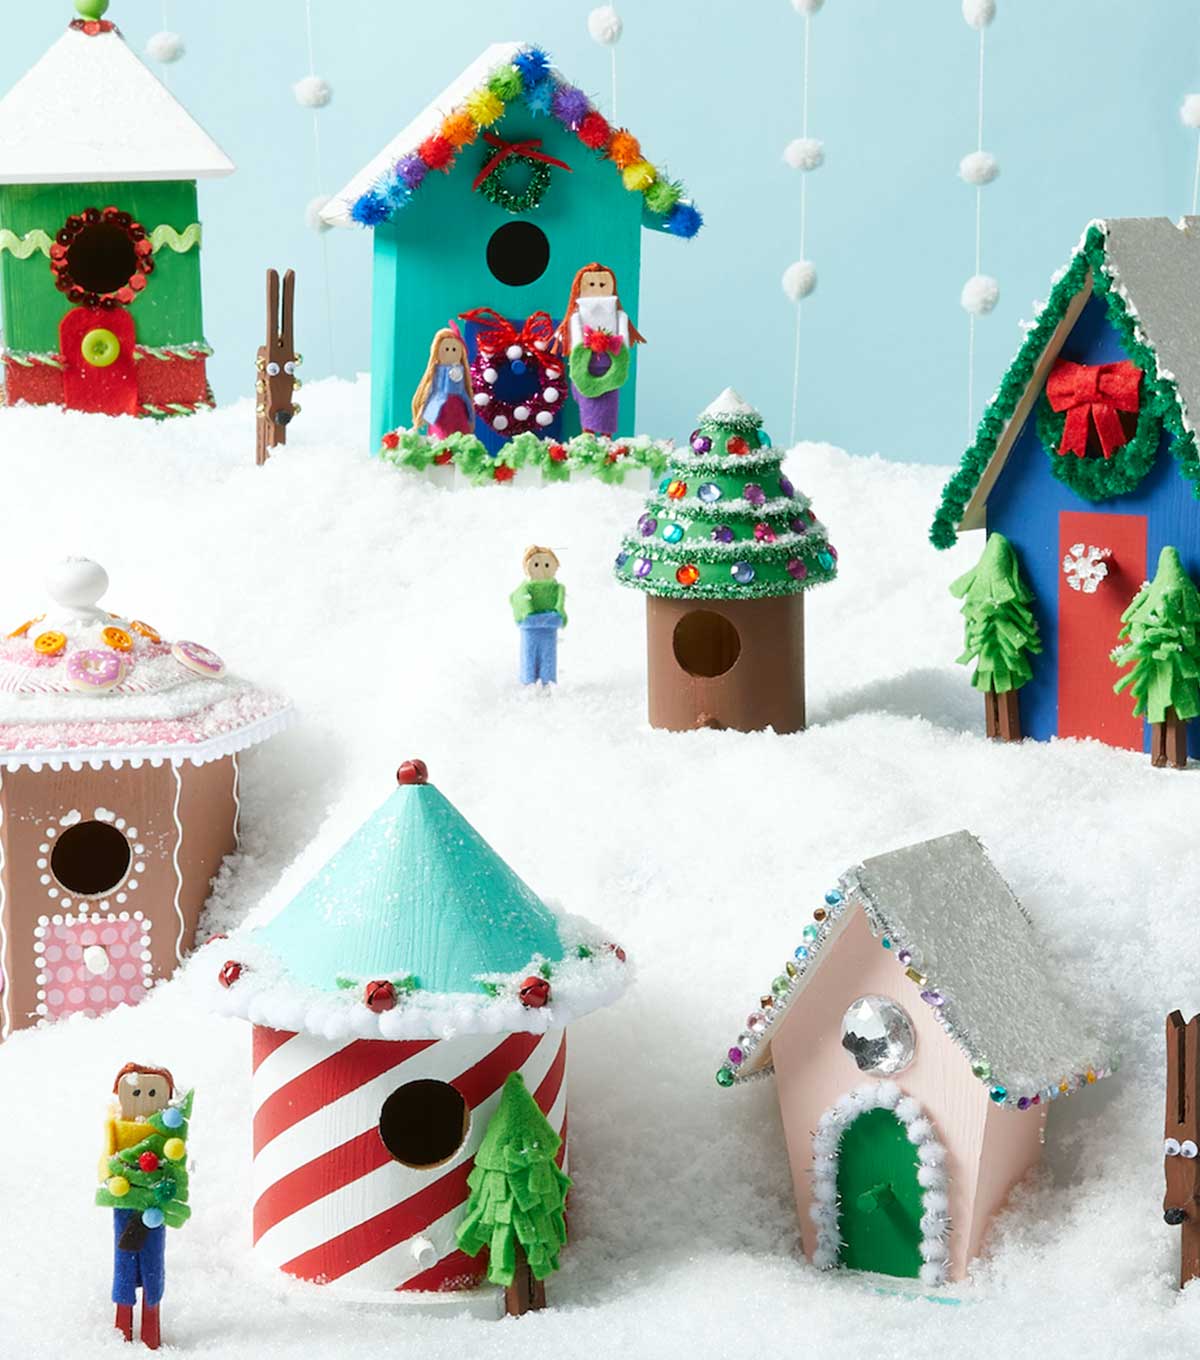 How To Make A Christmas Village With Wood Birdhouses Joann